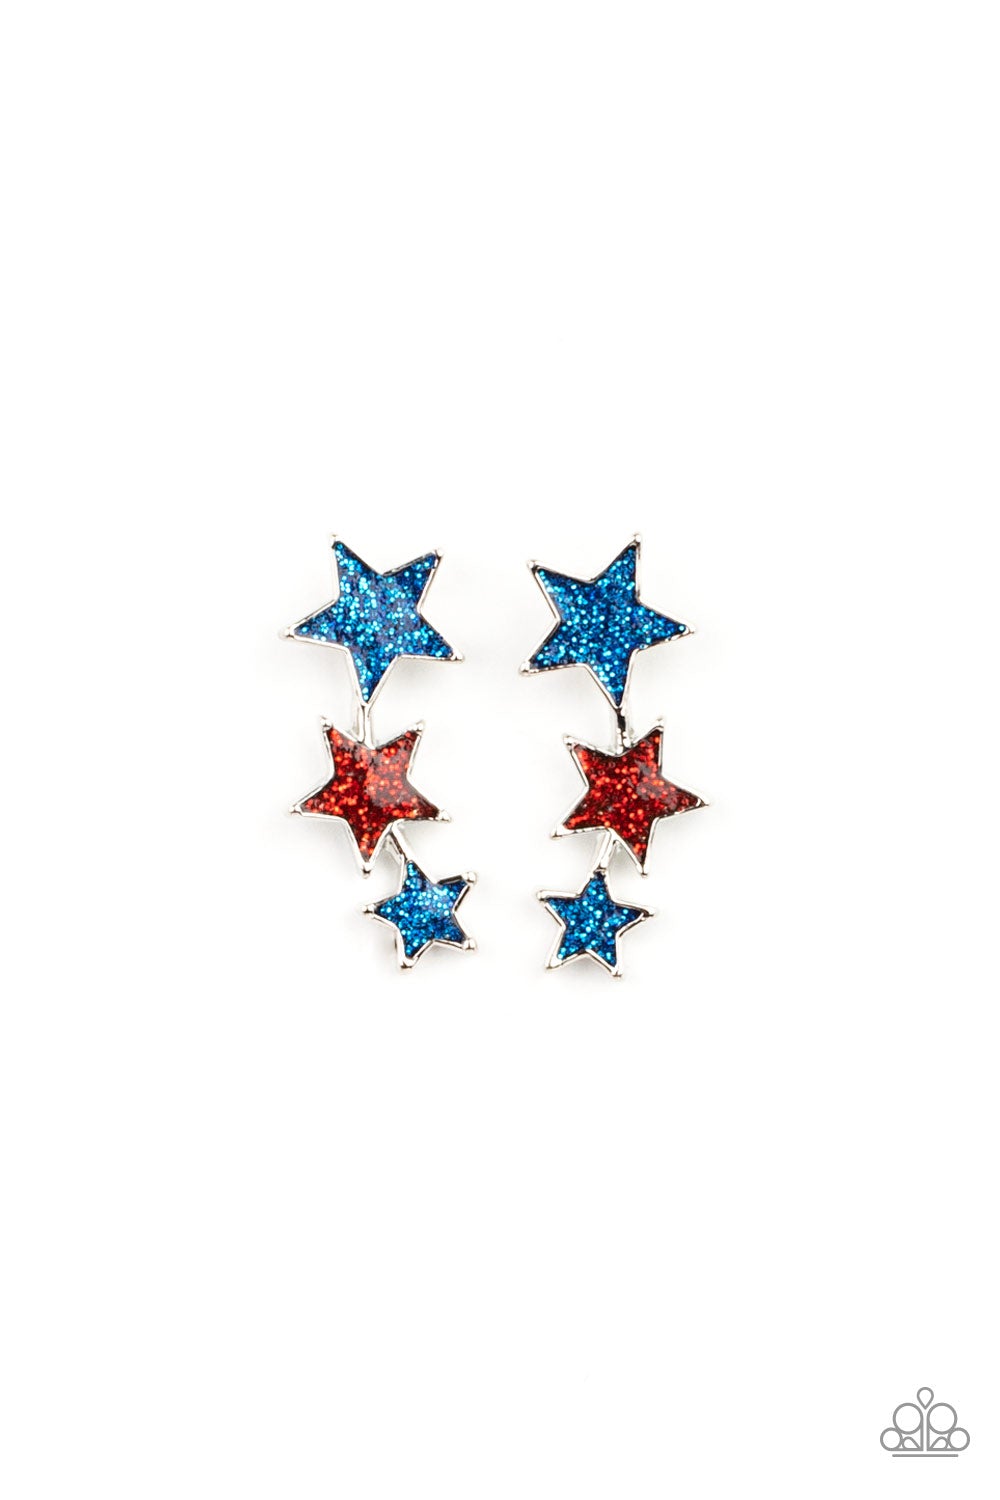 Paparazzi Accessories - MULTI RED WHITE BLUE STAR #SS6 - Starlet Shimmer Earrings